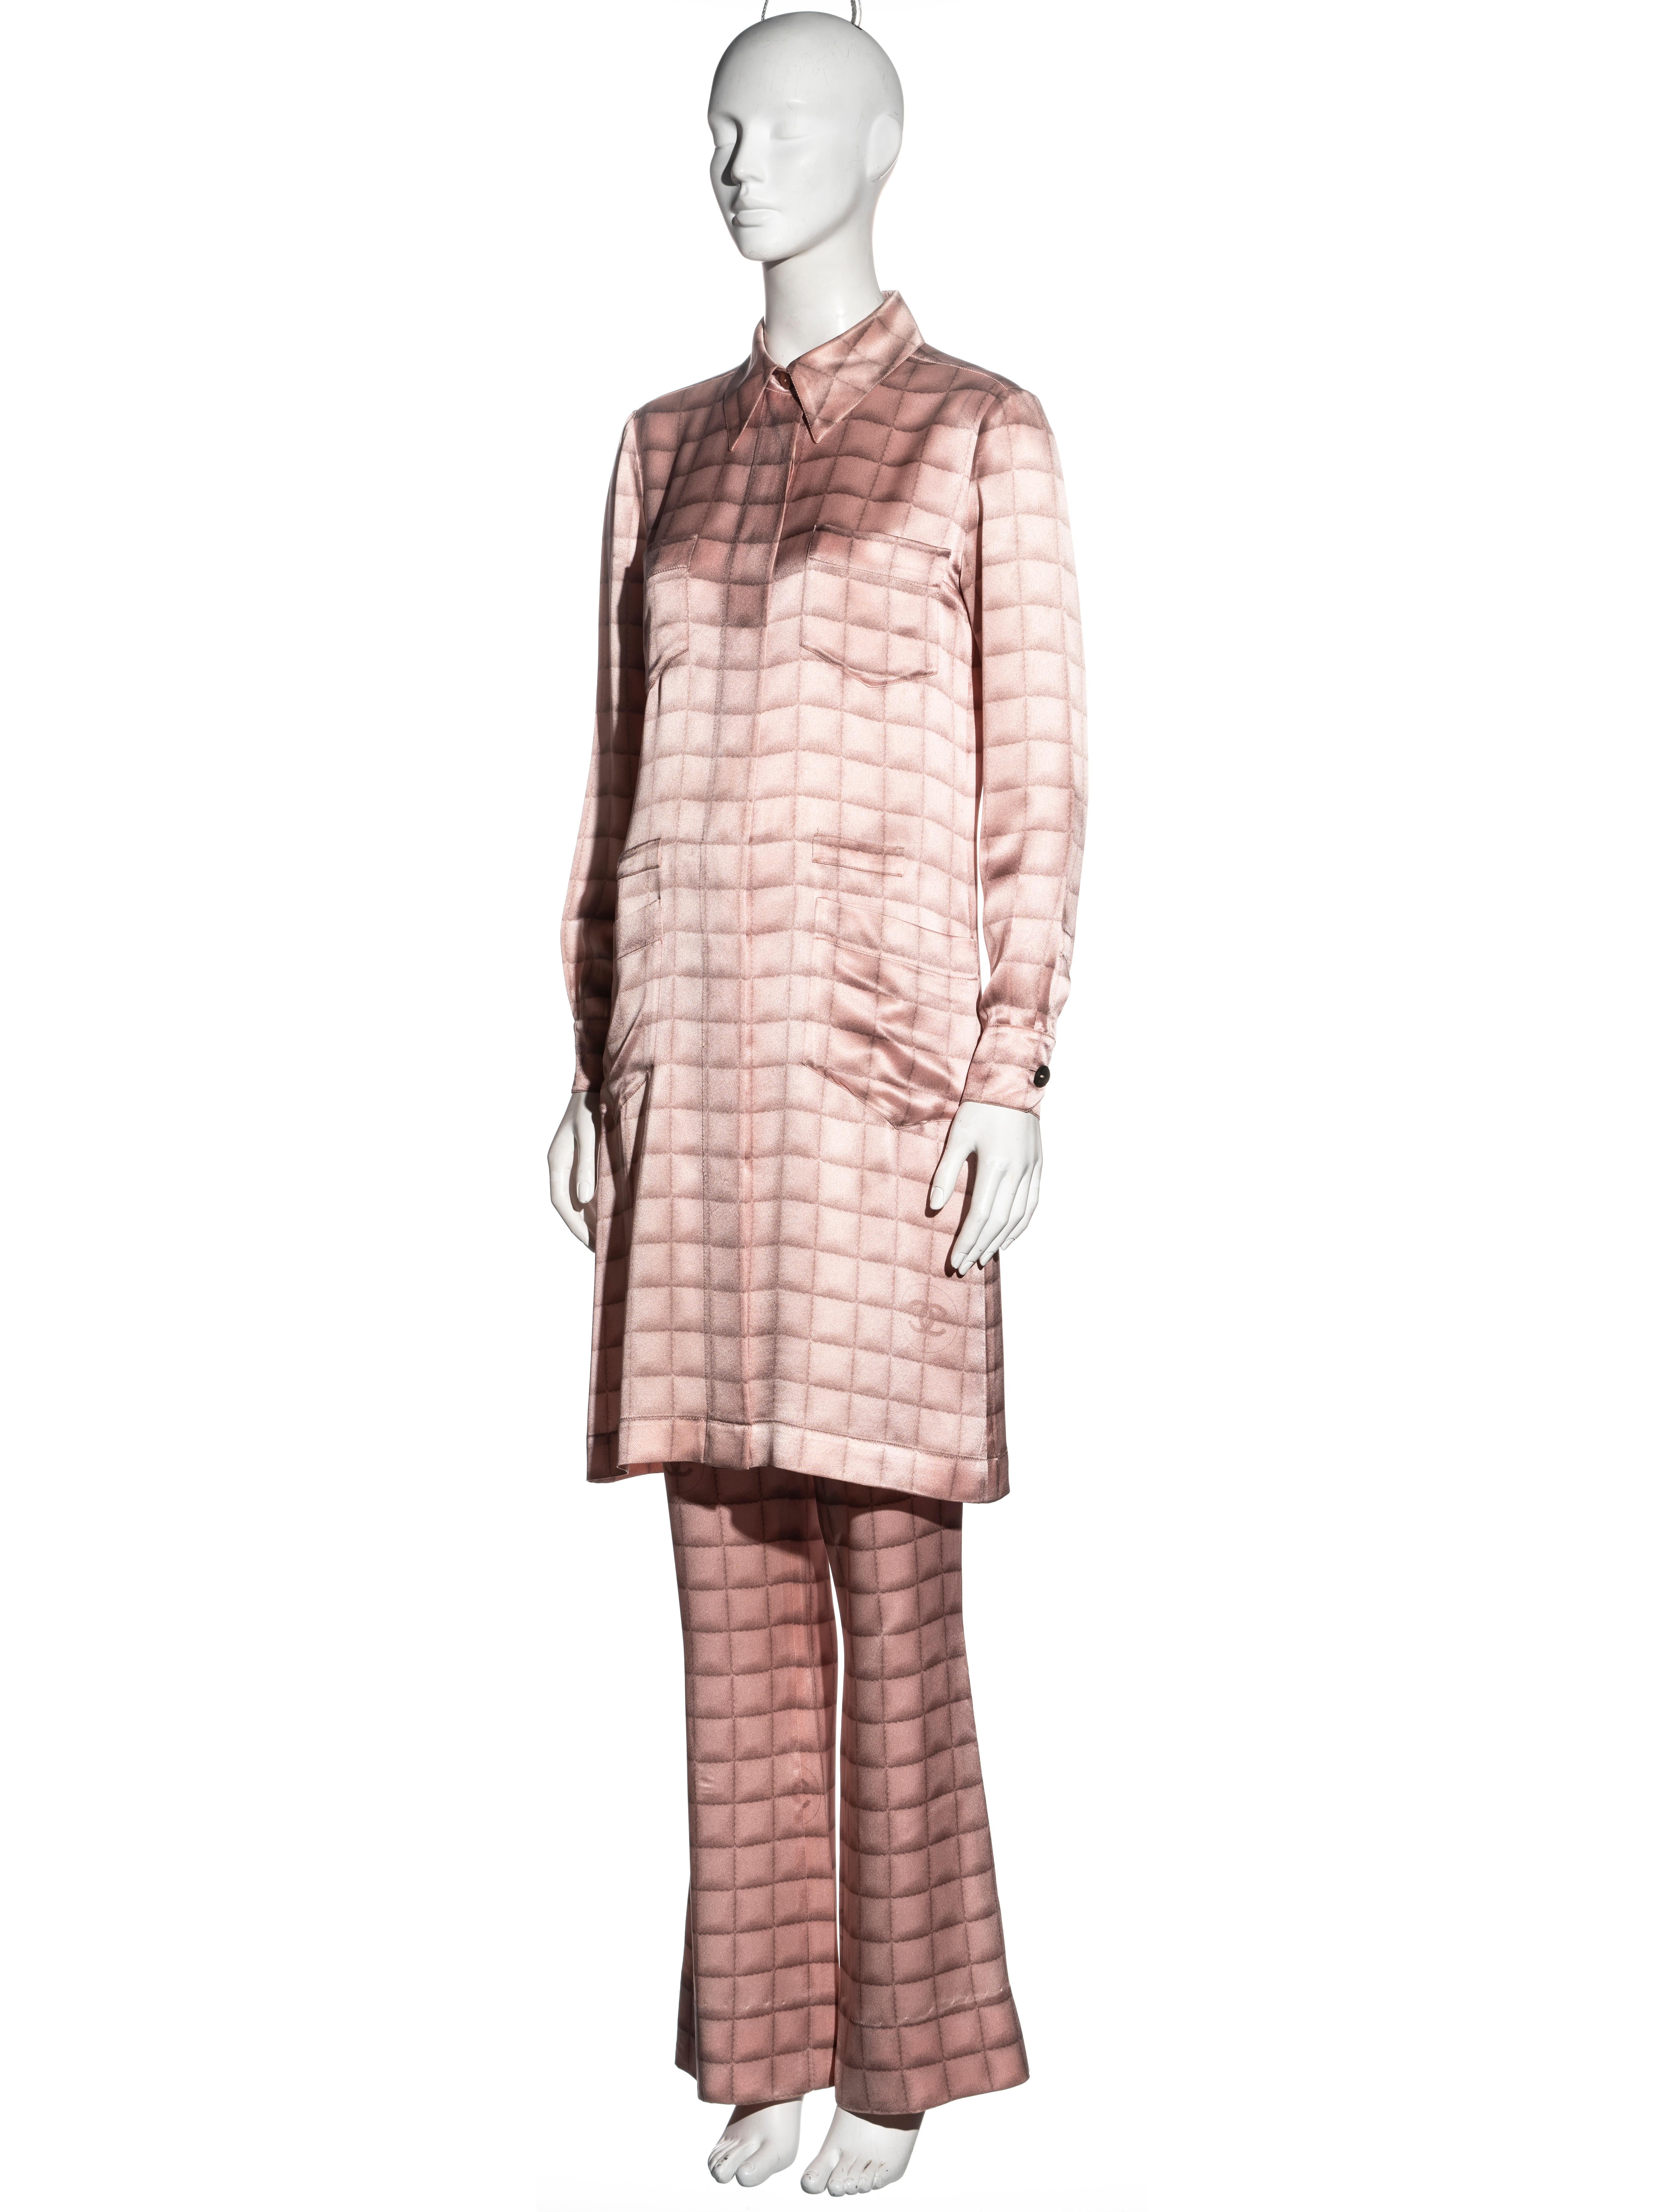 Women's Chanel by Karl Lagerfeld pink silk shirt dress and pants suit, fw 2000